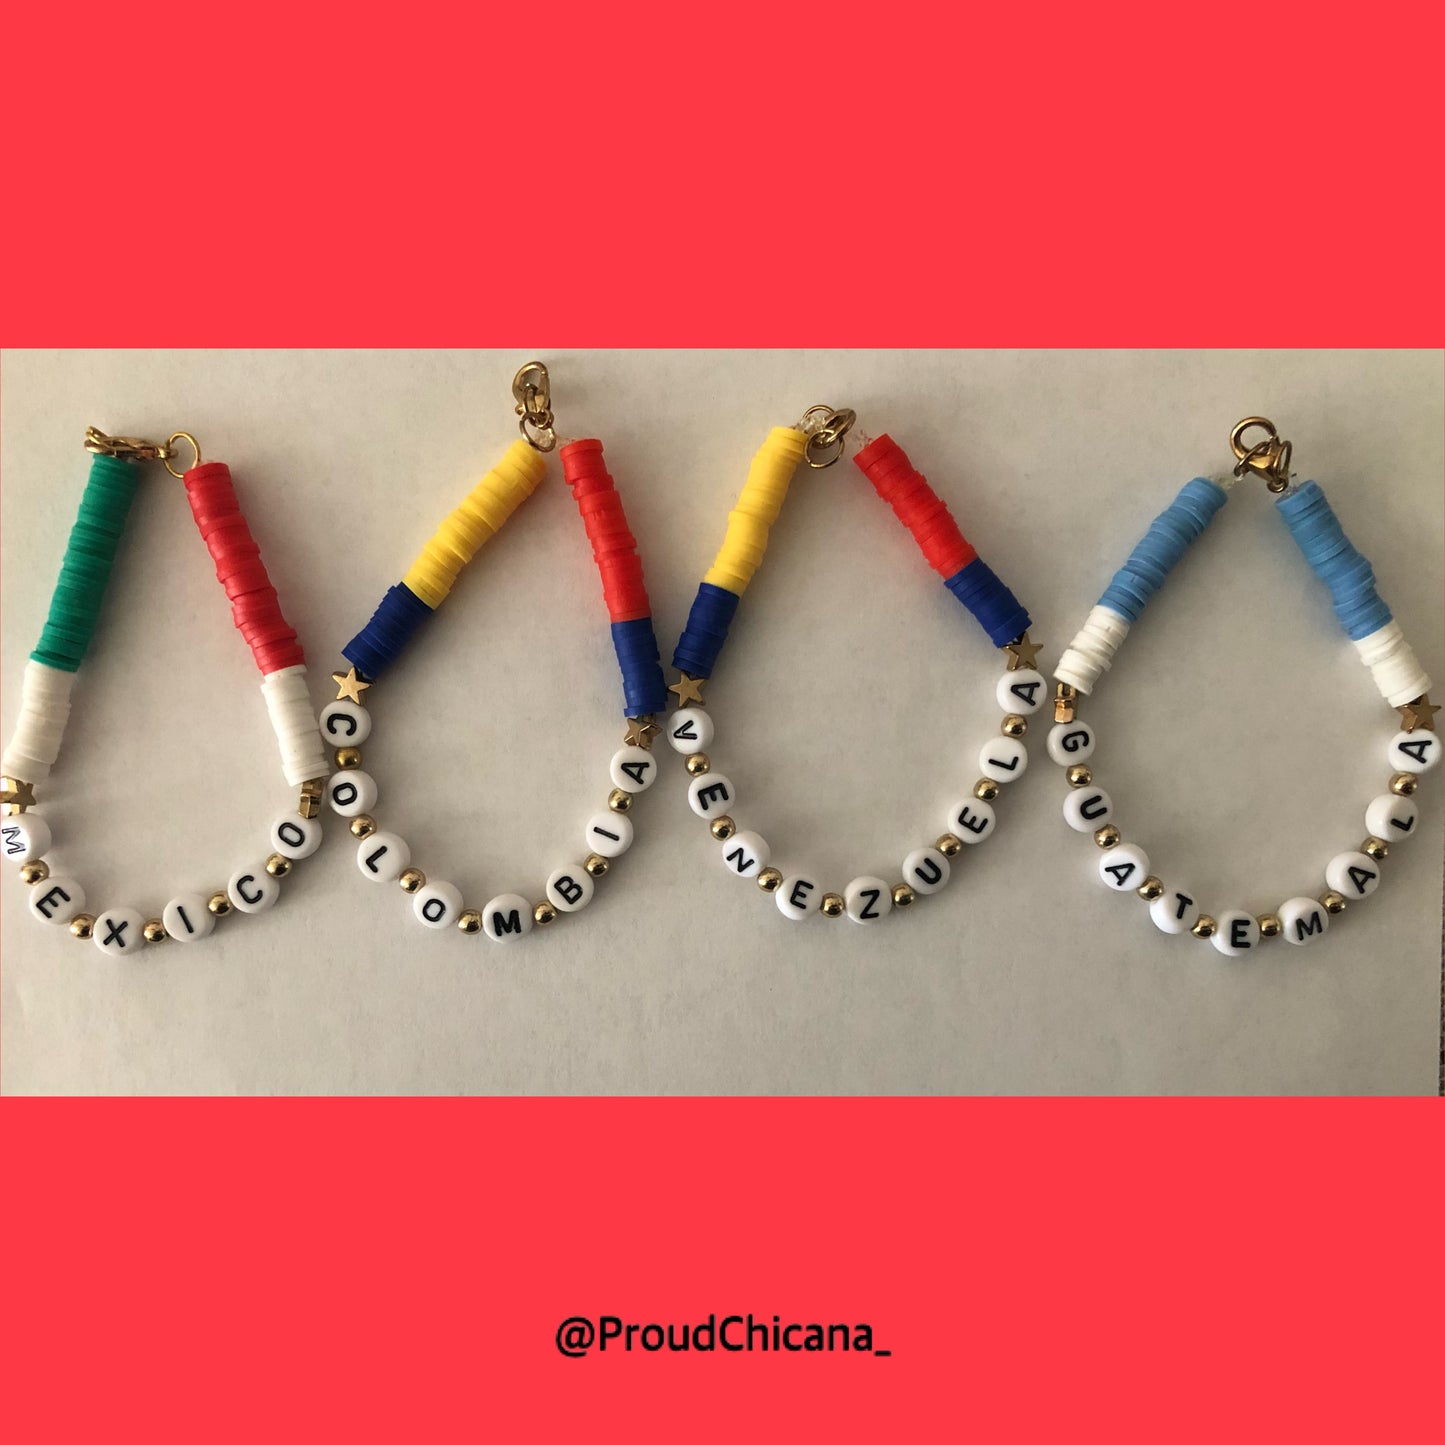 Latin American countries bracelets | Mexico, Central and South America, and Caribbean